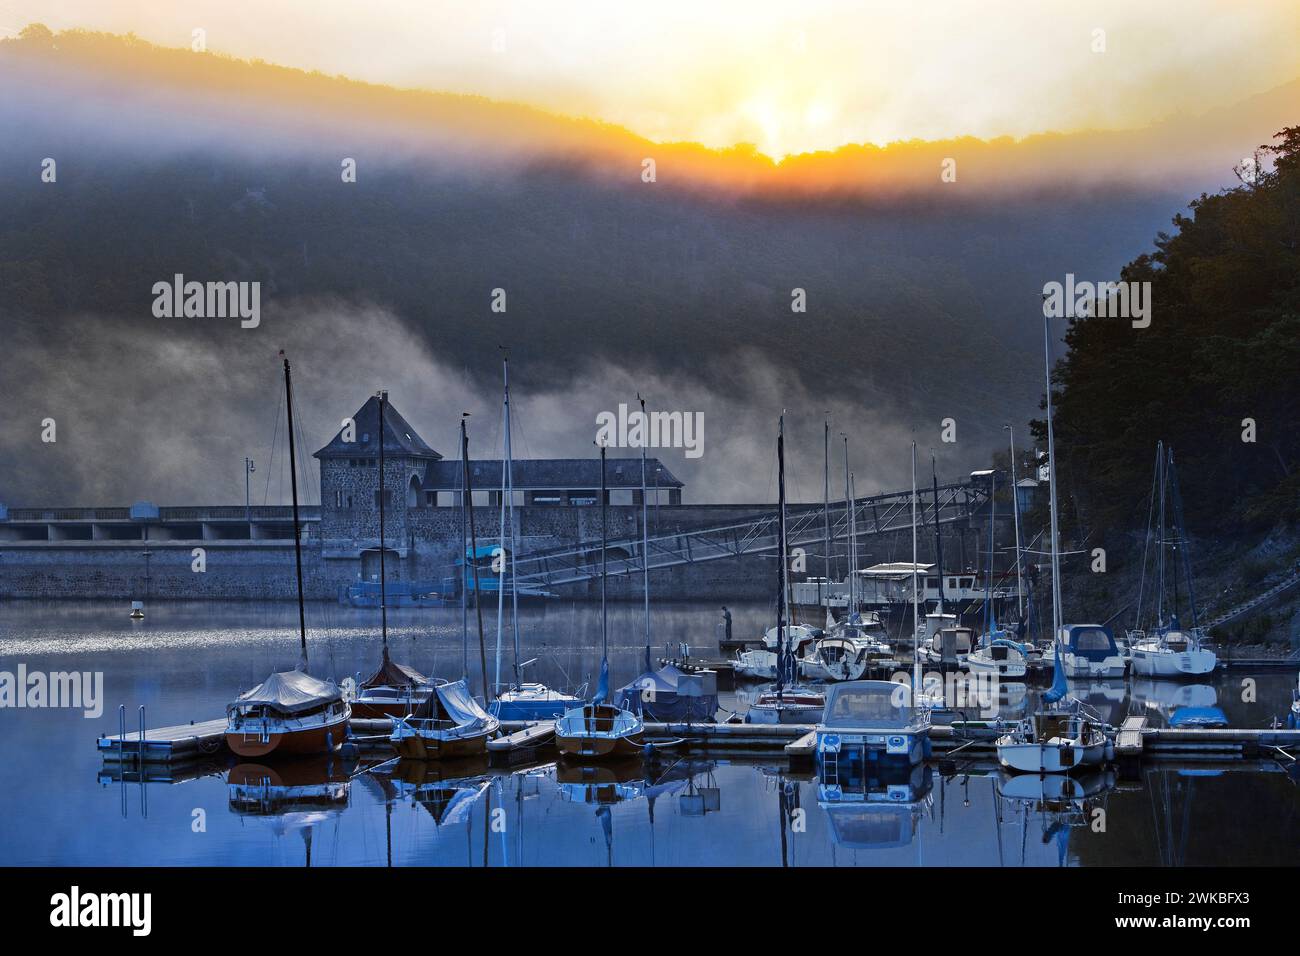 Eder dam with dam wall and pleasure boats on the Edersee in the early morning, Germany, Hesse, Kellerwald National Park, Edertal Stock Photo